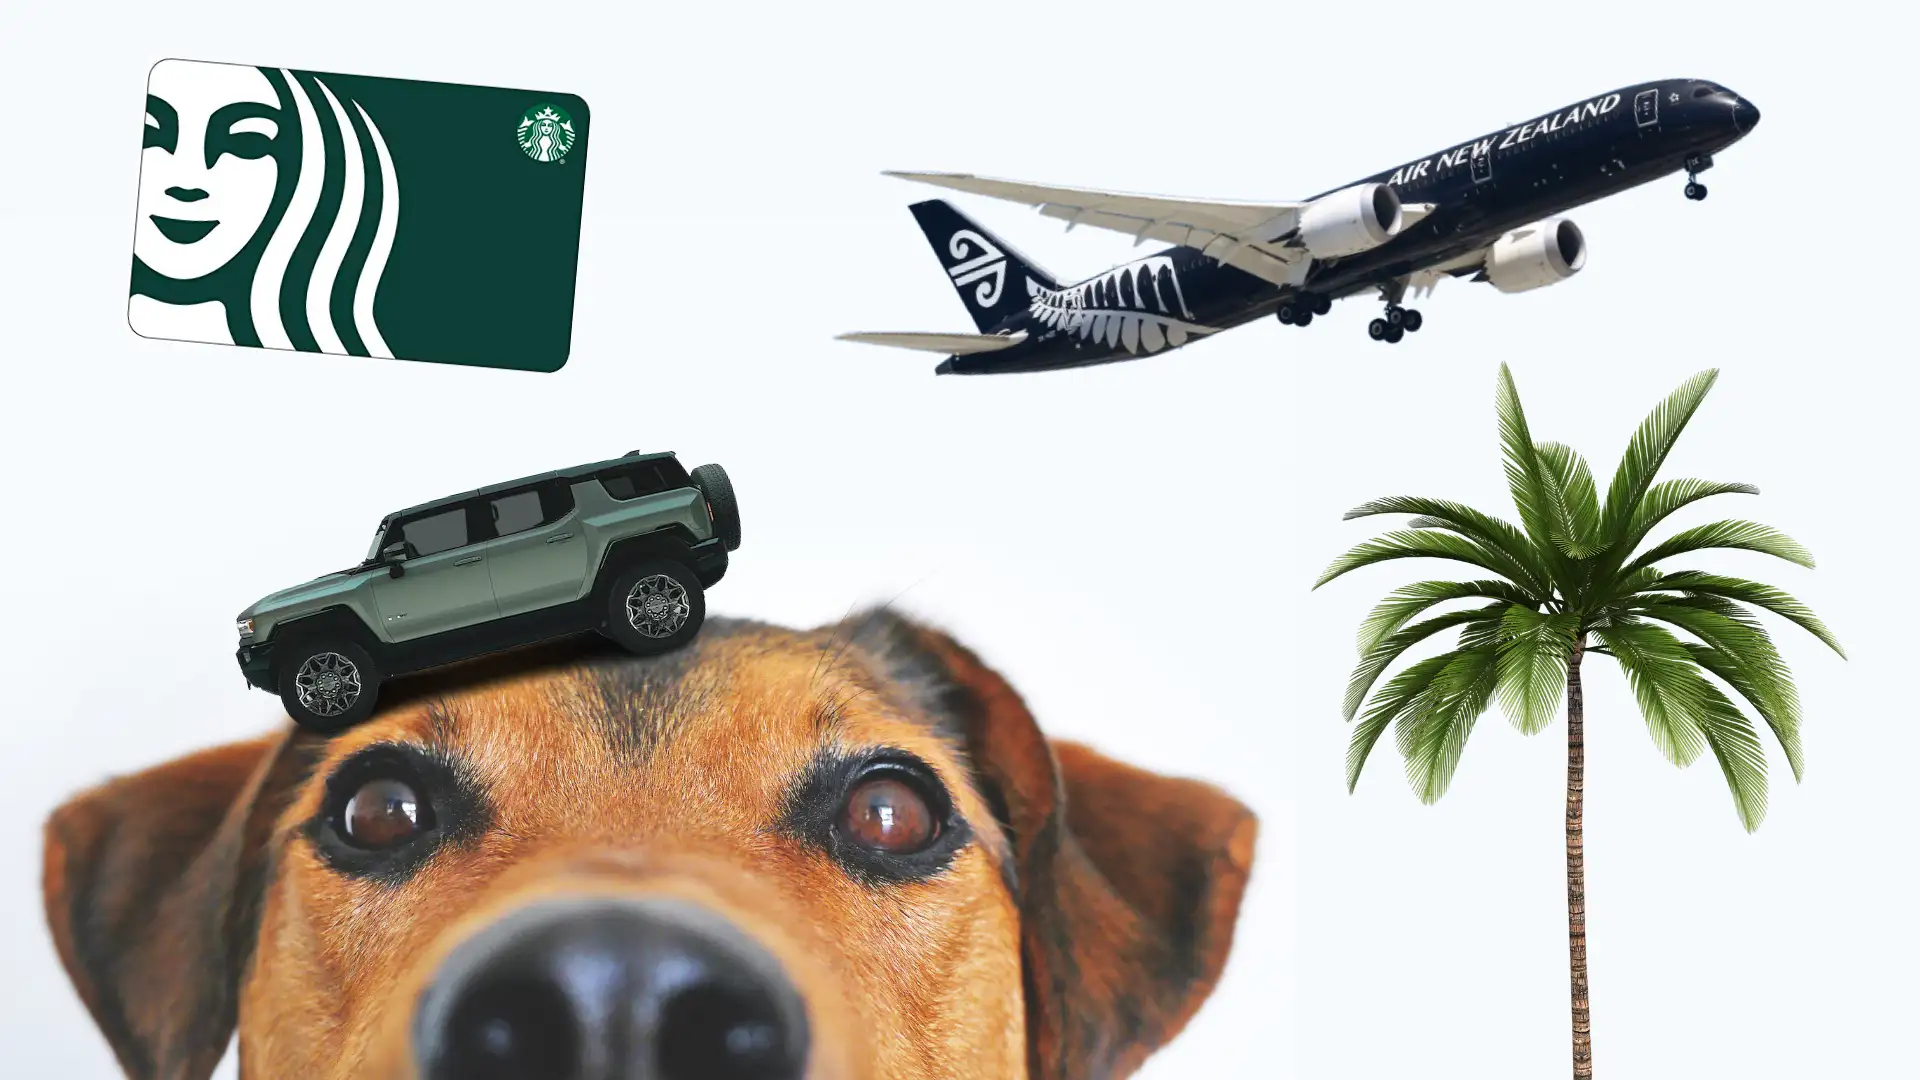 Digits: Hummers, dog hotels, and $1T gift cards